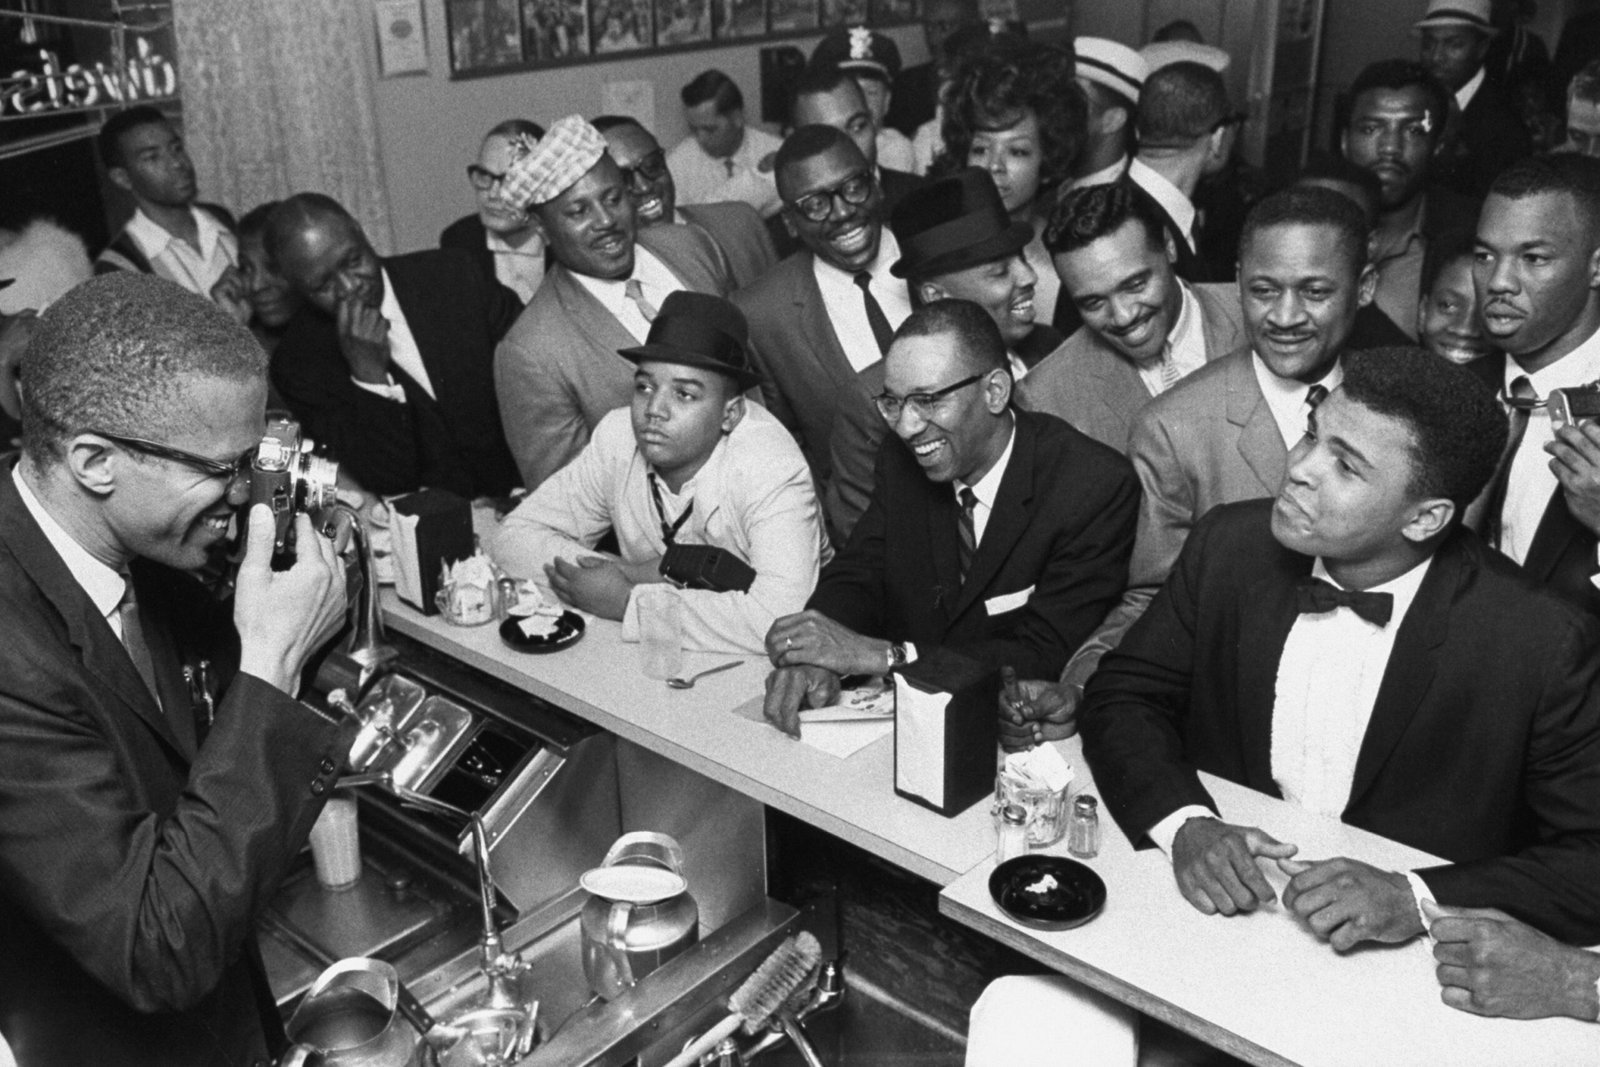 MARCH 1964 - MIAMI: Black Muslim leader Malcolm X (L) behind soda fountain training his camera on tux-clad Cassius Clay (now Muhammad Ali) (R) sitting at counter surrounded by jubilant fans after he beat Sonny Liston for the heavyweight championship of the world.  (Photo by Bob Gomel/The LIFE Images Collection via Getty Images/Getty Images)